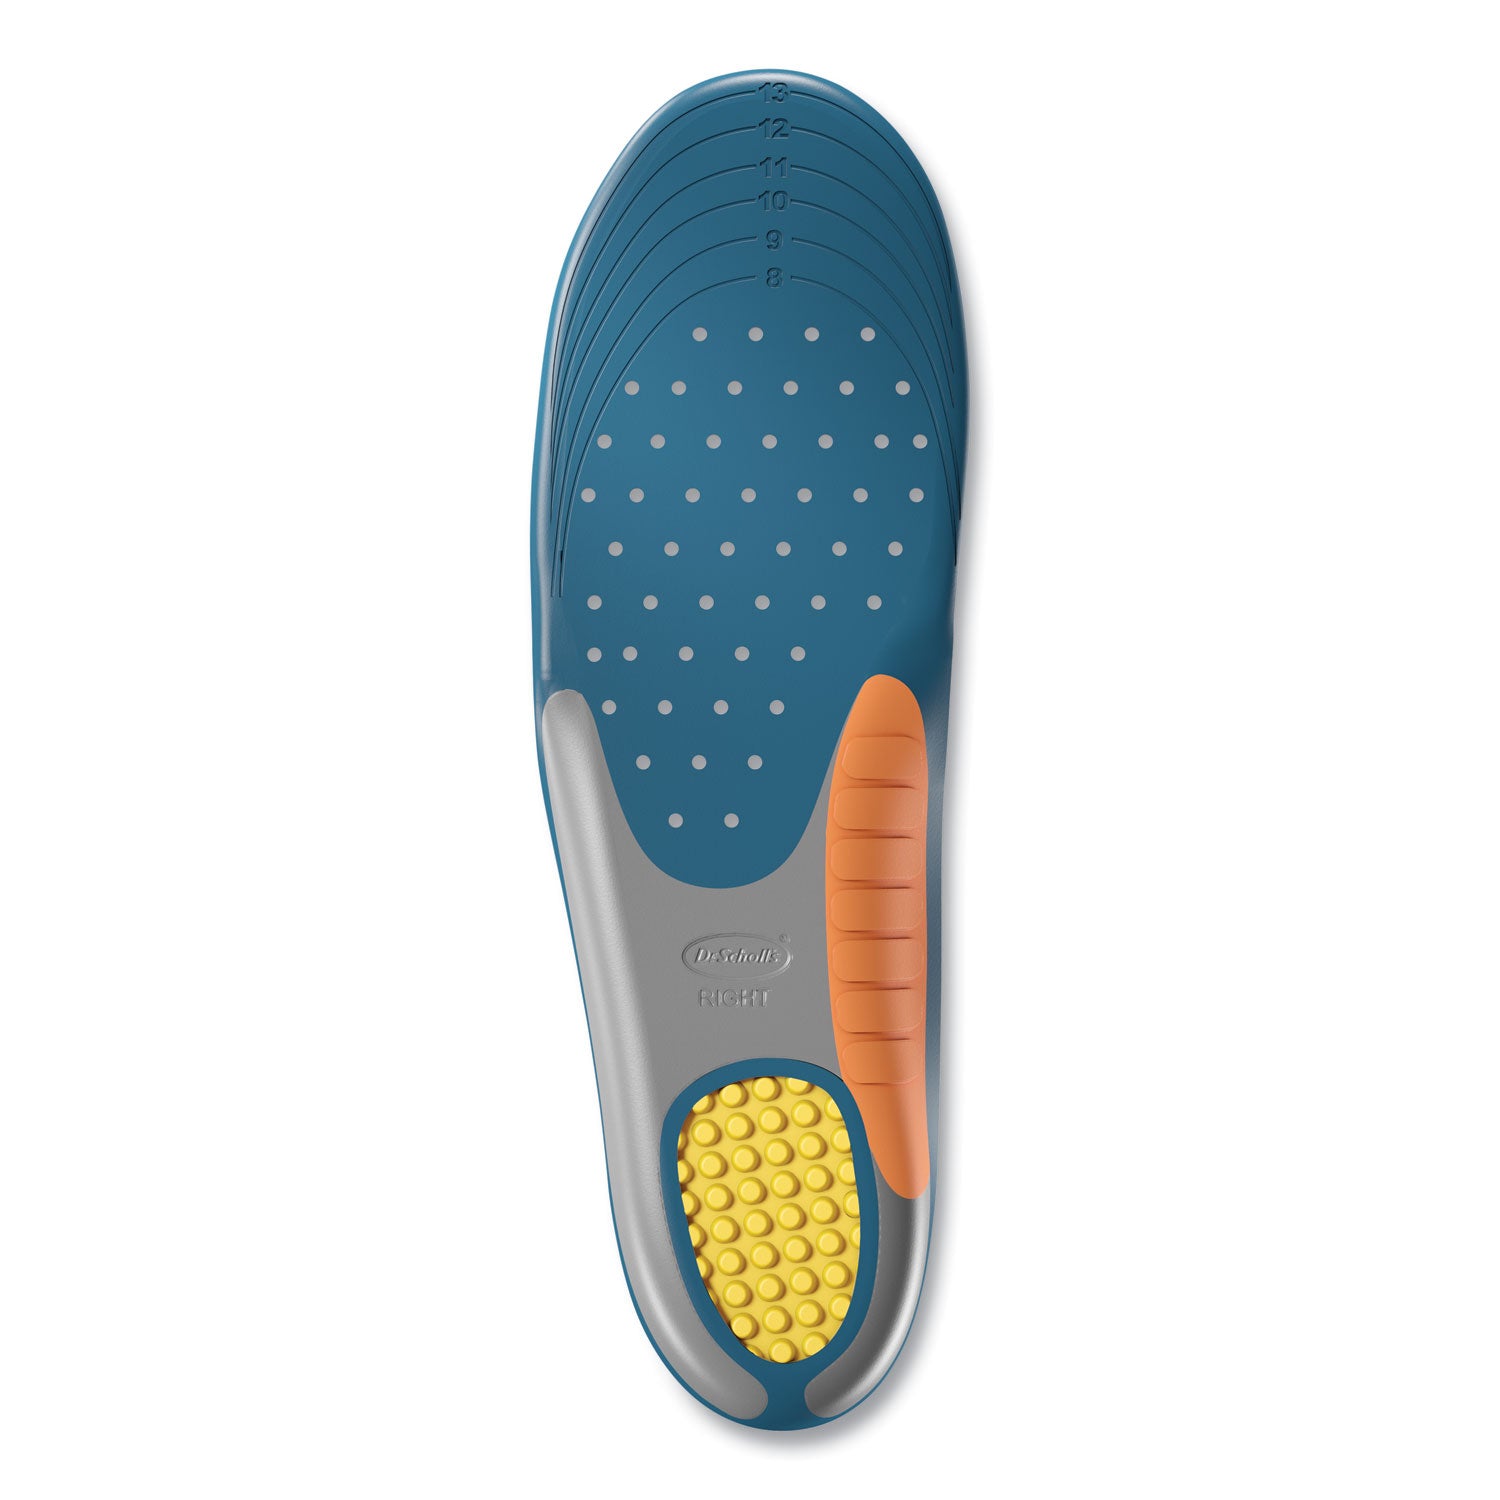 pain-relief-orthotic-heavy-duty-support-insoles-men-sizes-8-to-14-gray-blue-orange-yellow-pair_dsc59048 - 3